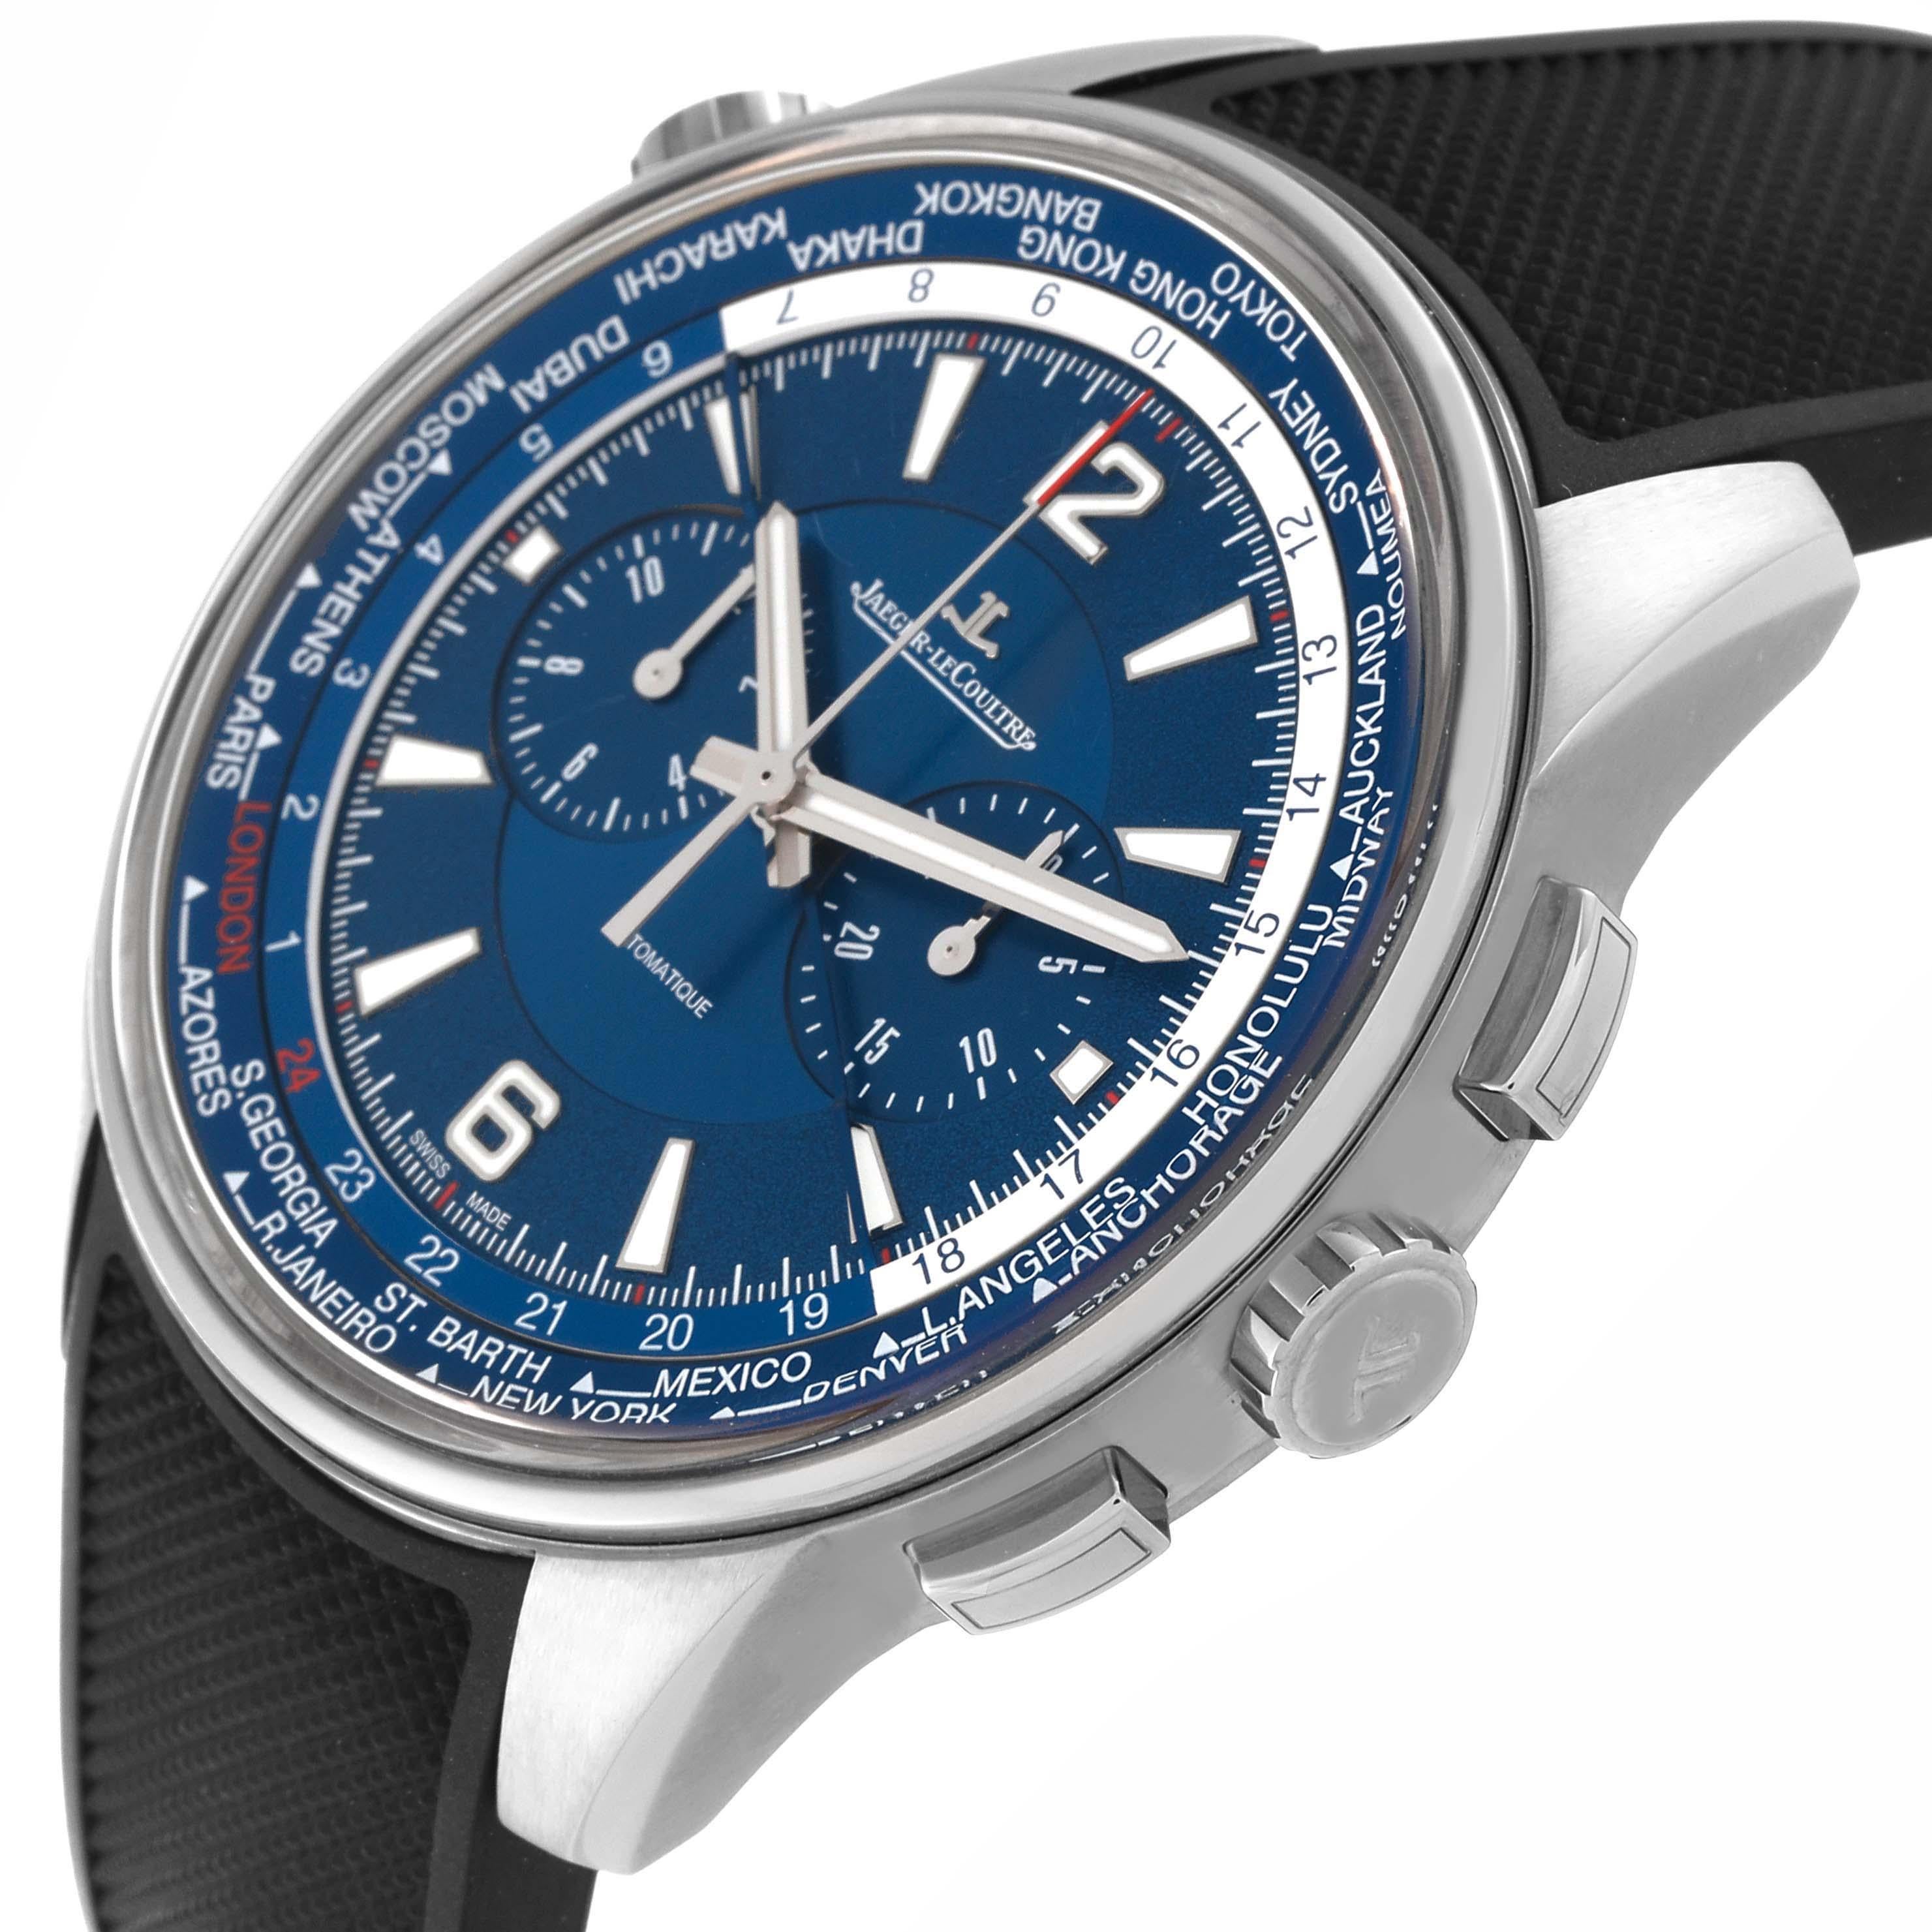 Jaeger LeCoultre Polaris World Time Titanium Mens Watch 844.T.C2.S Q905T480. Self-winding automatic chronograph movement. Titanium case 44 mm in diameter. Crown at 10 o'clock for adjusting the world time dial.  Exhibition transparent sapphire